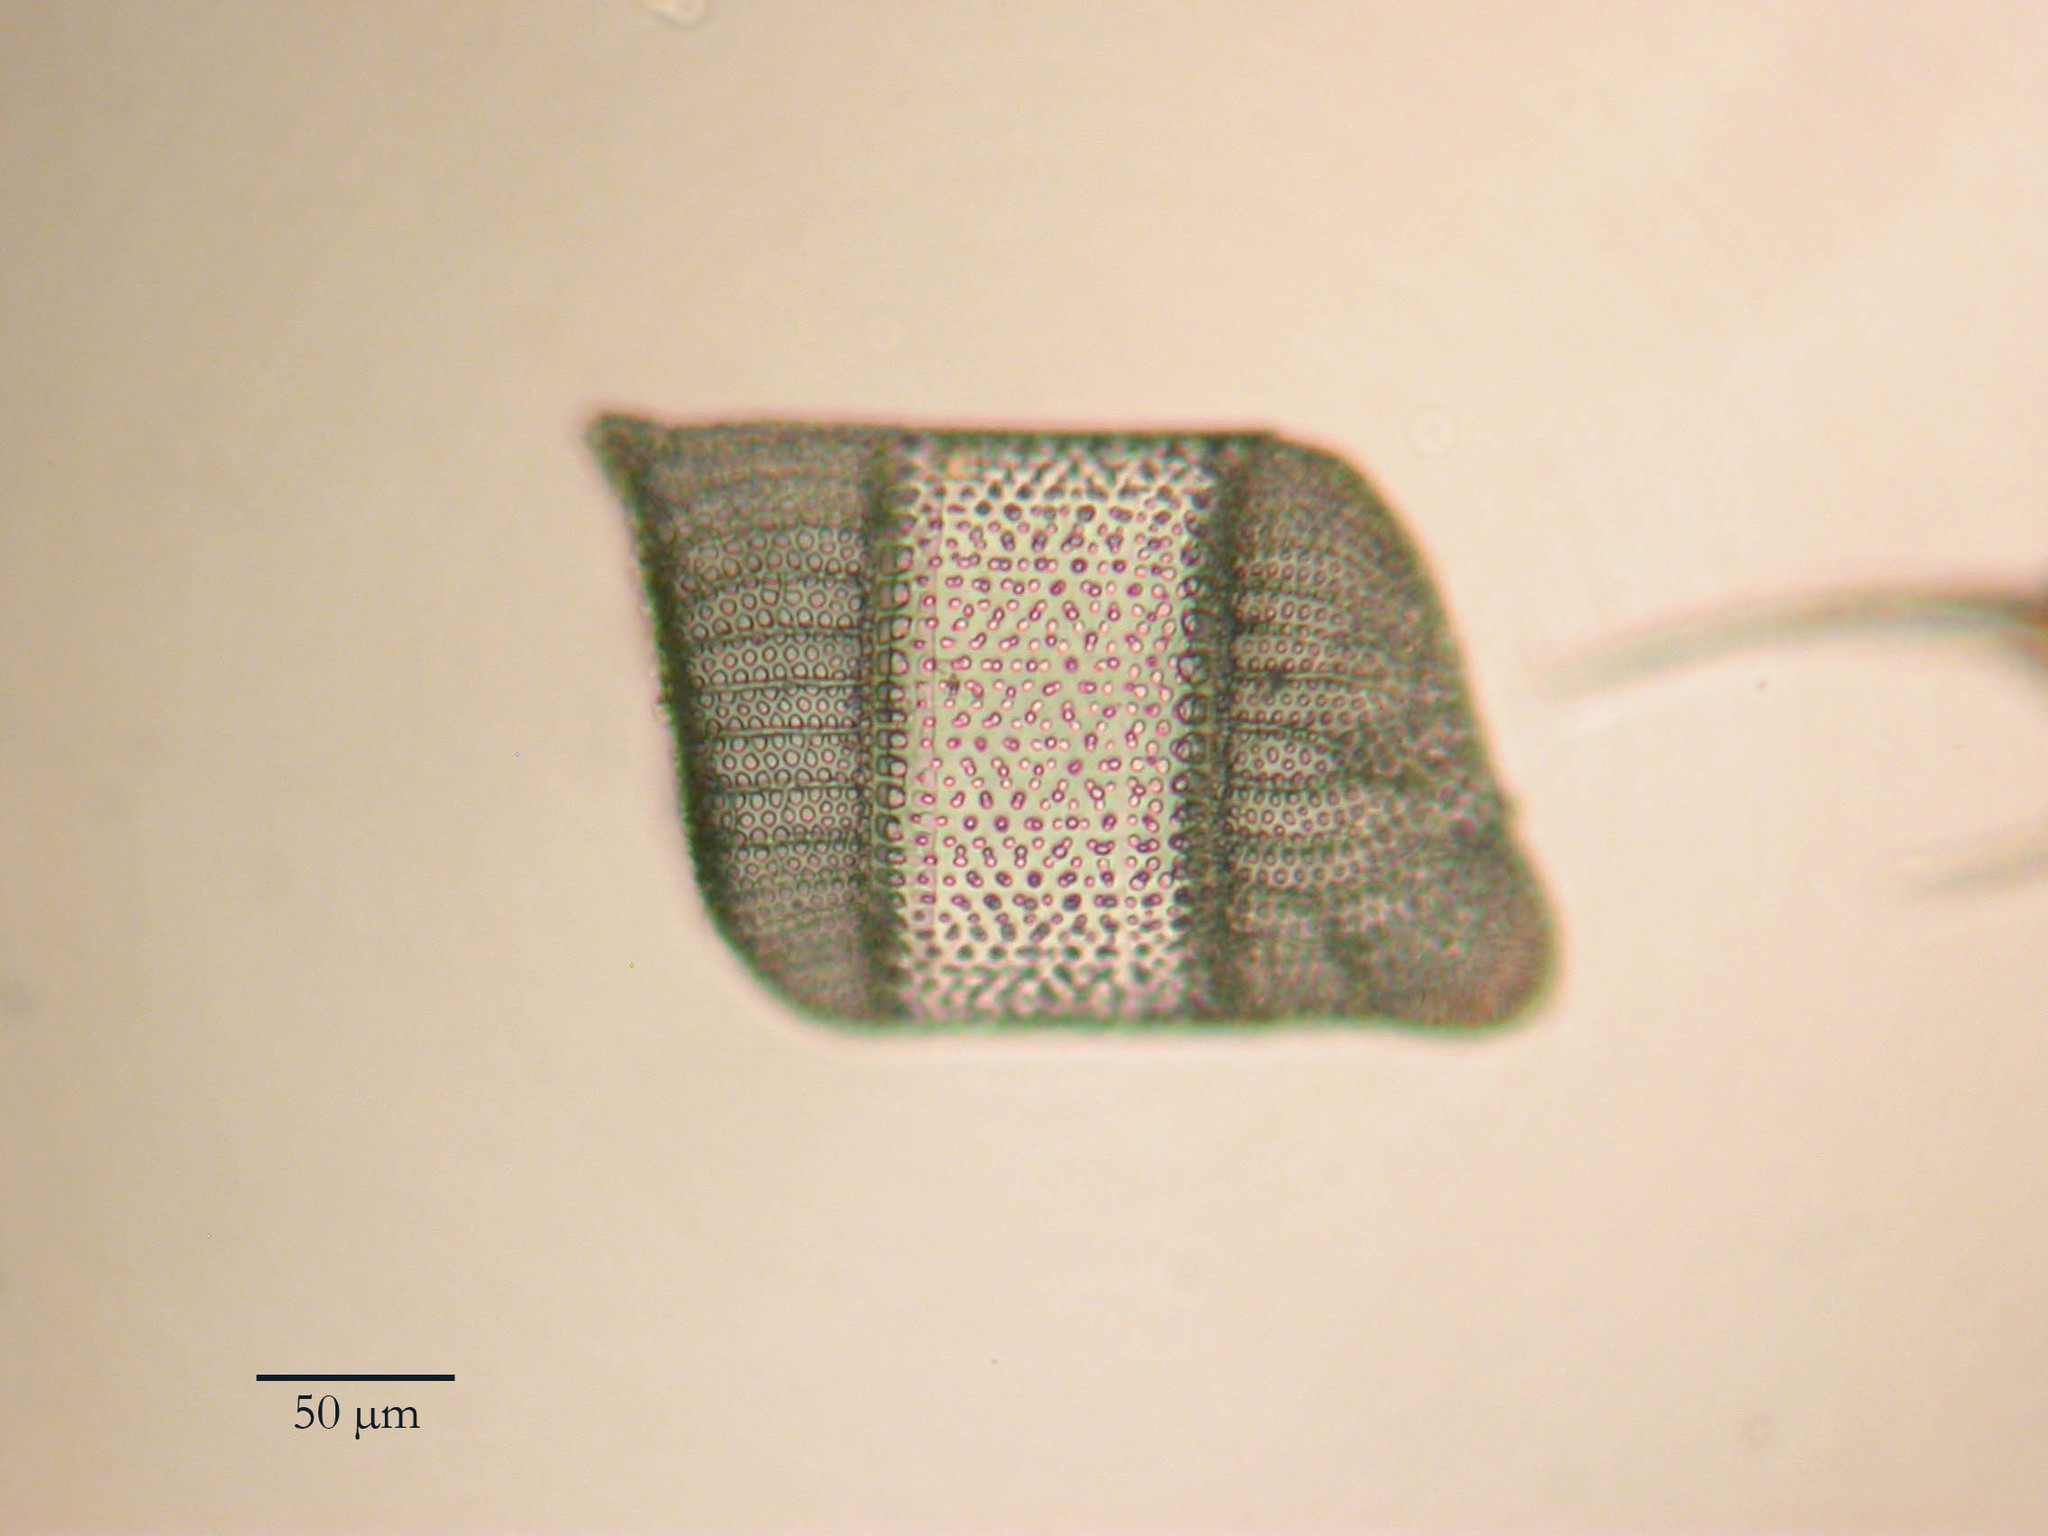 A single diatom frustule, showing an intricate network of holes (pores) that makes it look almost lace-like. 